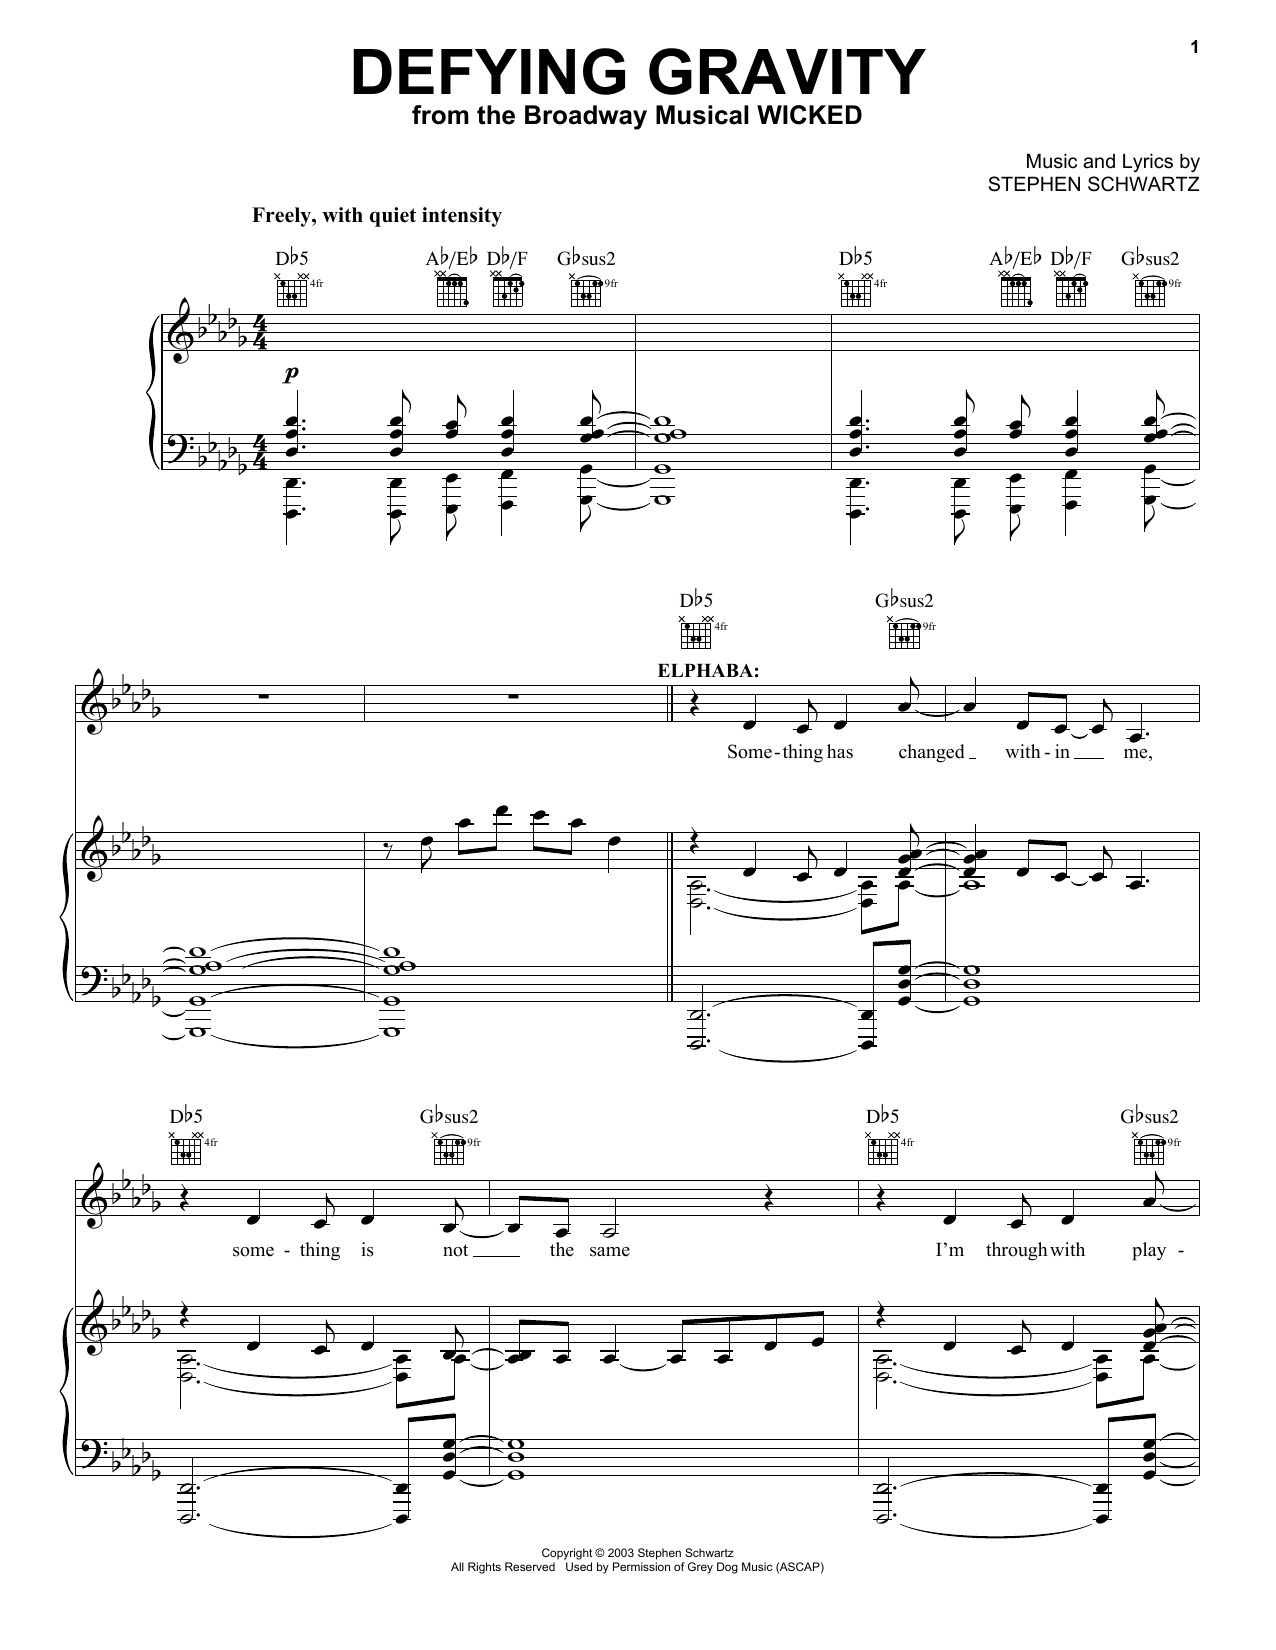 Stephen Schwartz Defying Gravity (from Wicked) sheet music notes and chords. Download Printable PDF.